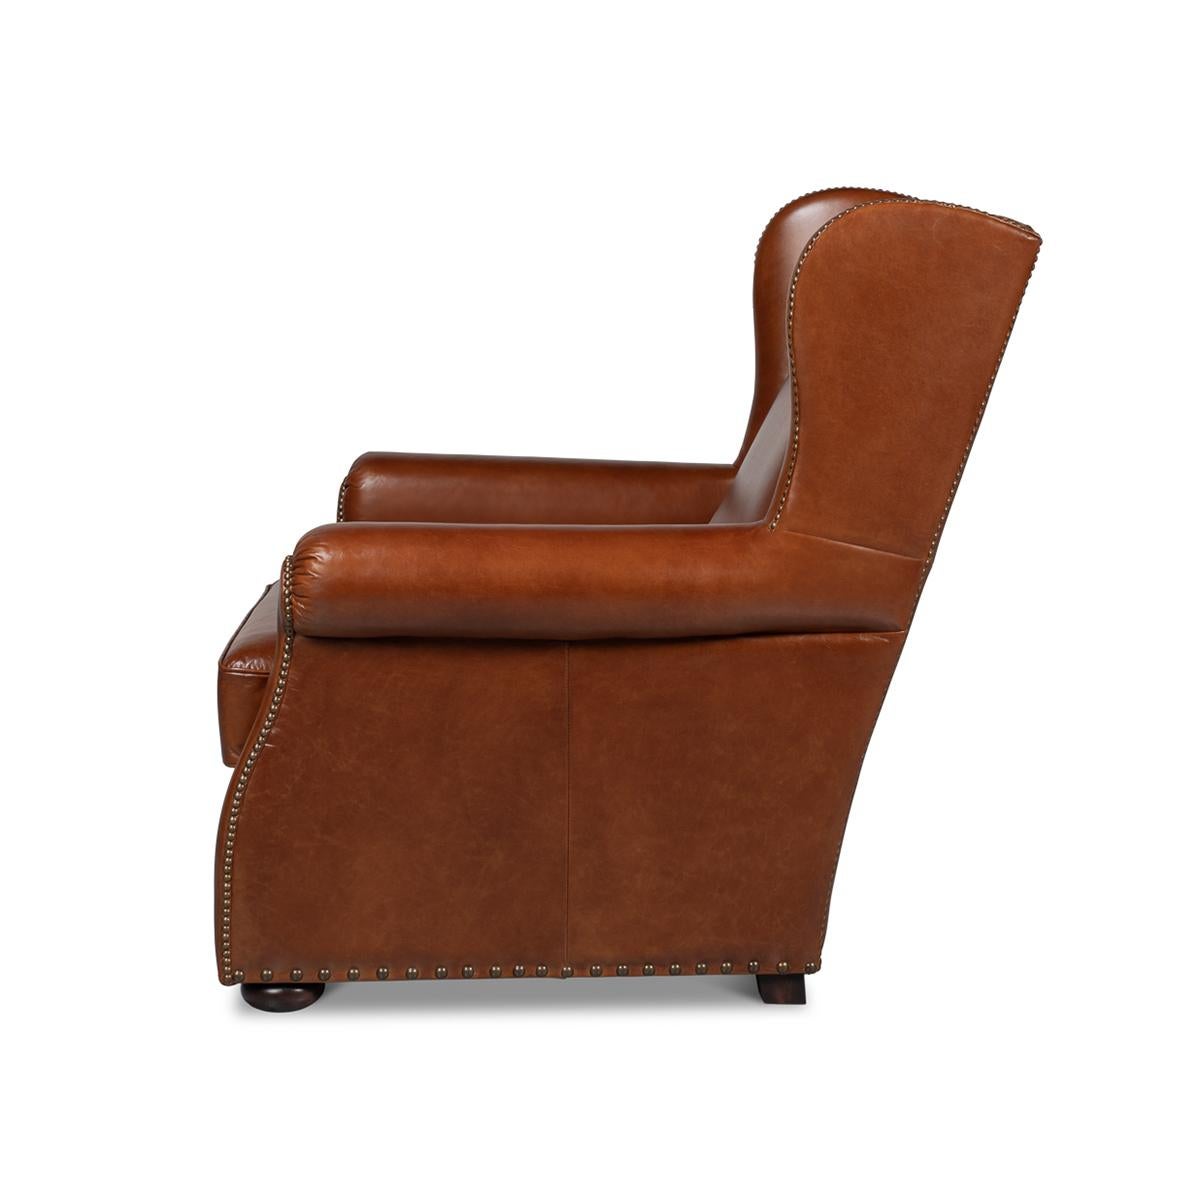 American Classical Havana Brown Classic Leather Armchair For Sale